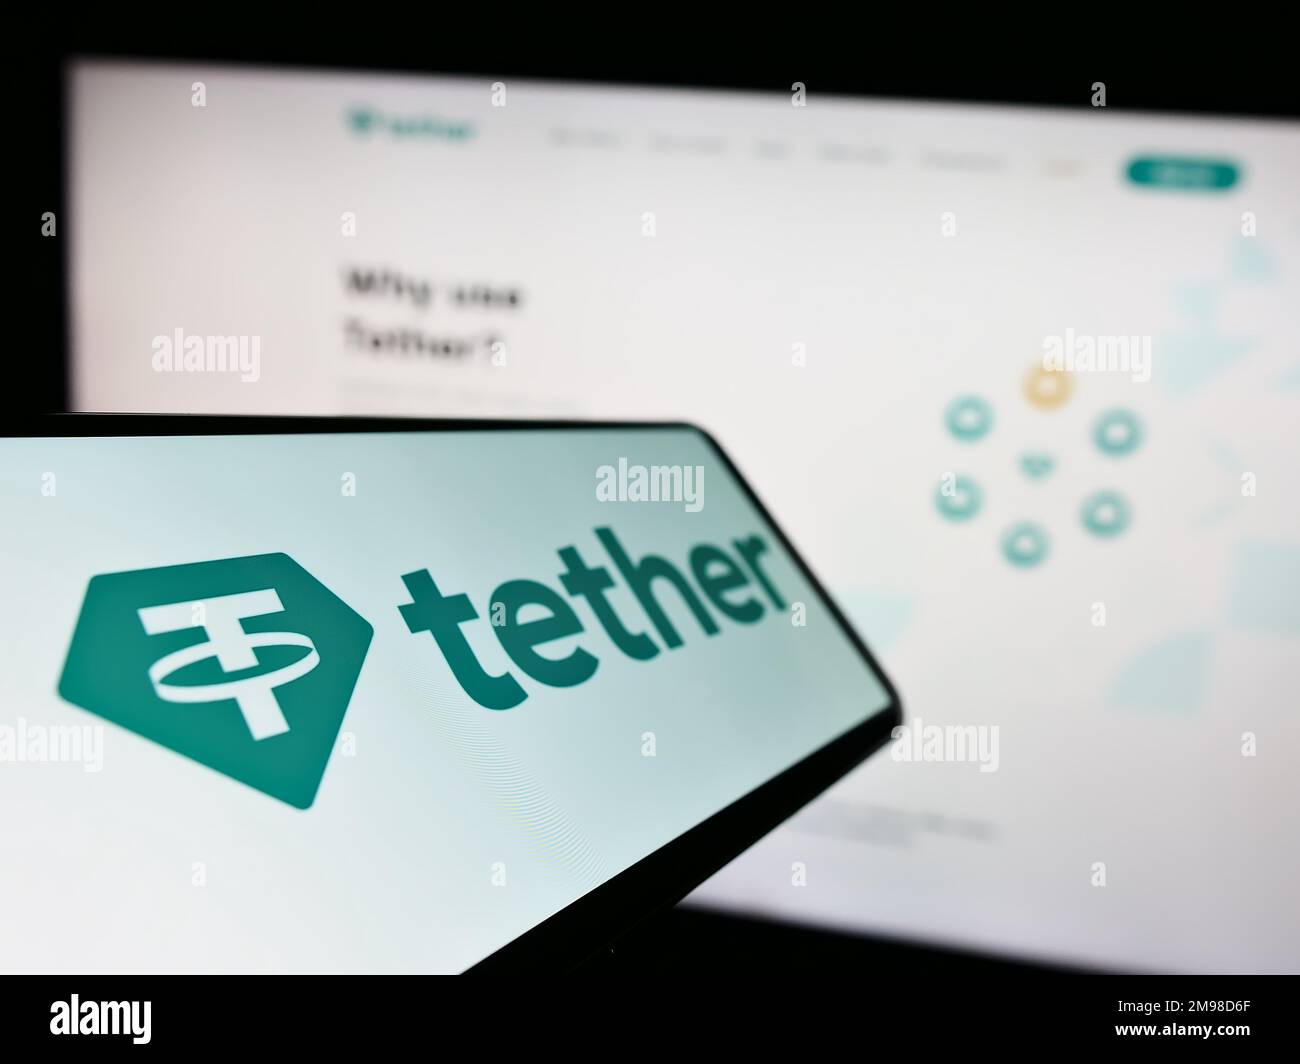 Mobile phone with logo of crypto company Tether Operations Limited on screen in front of business website. Focus on center-left of phone display. Stock Photo